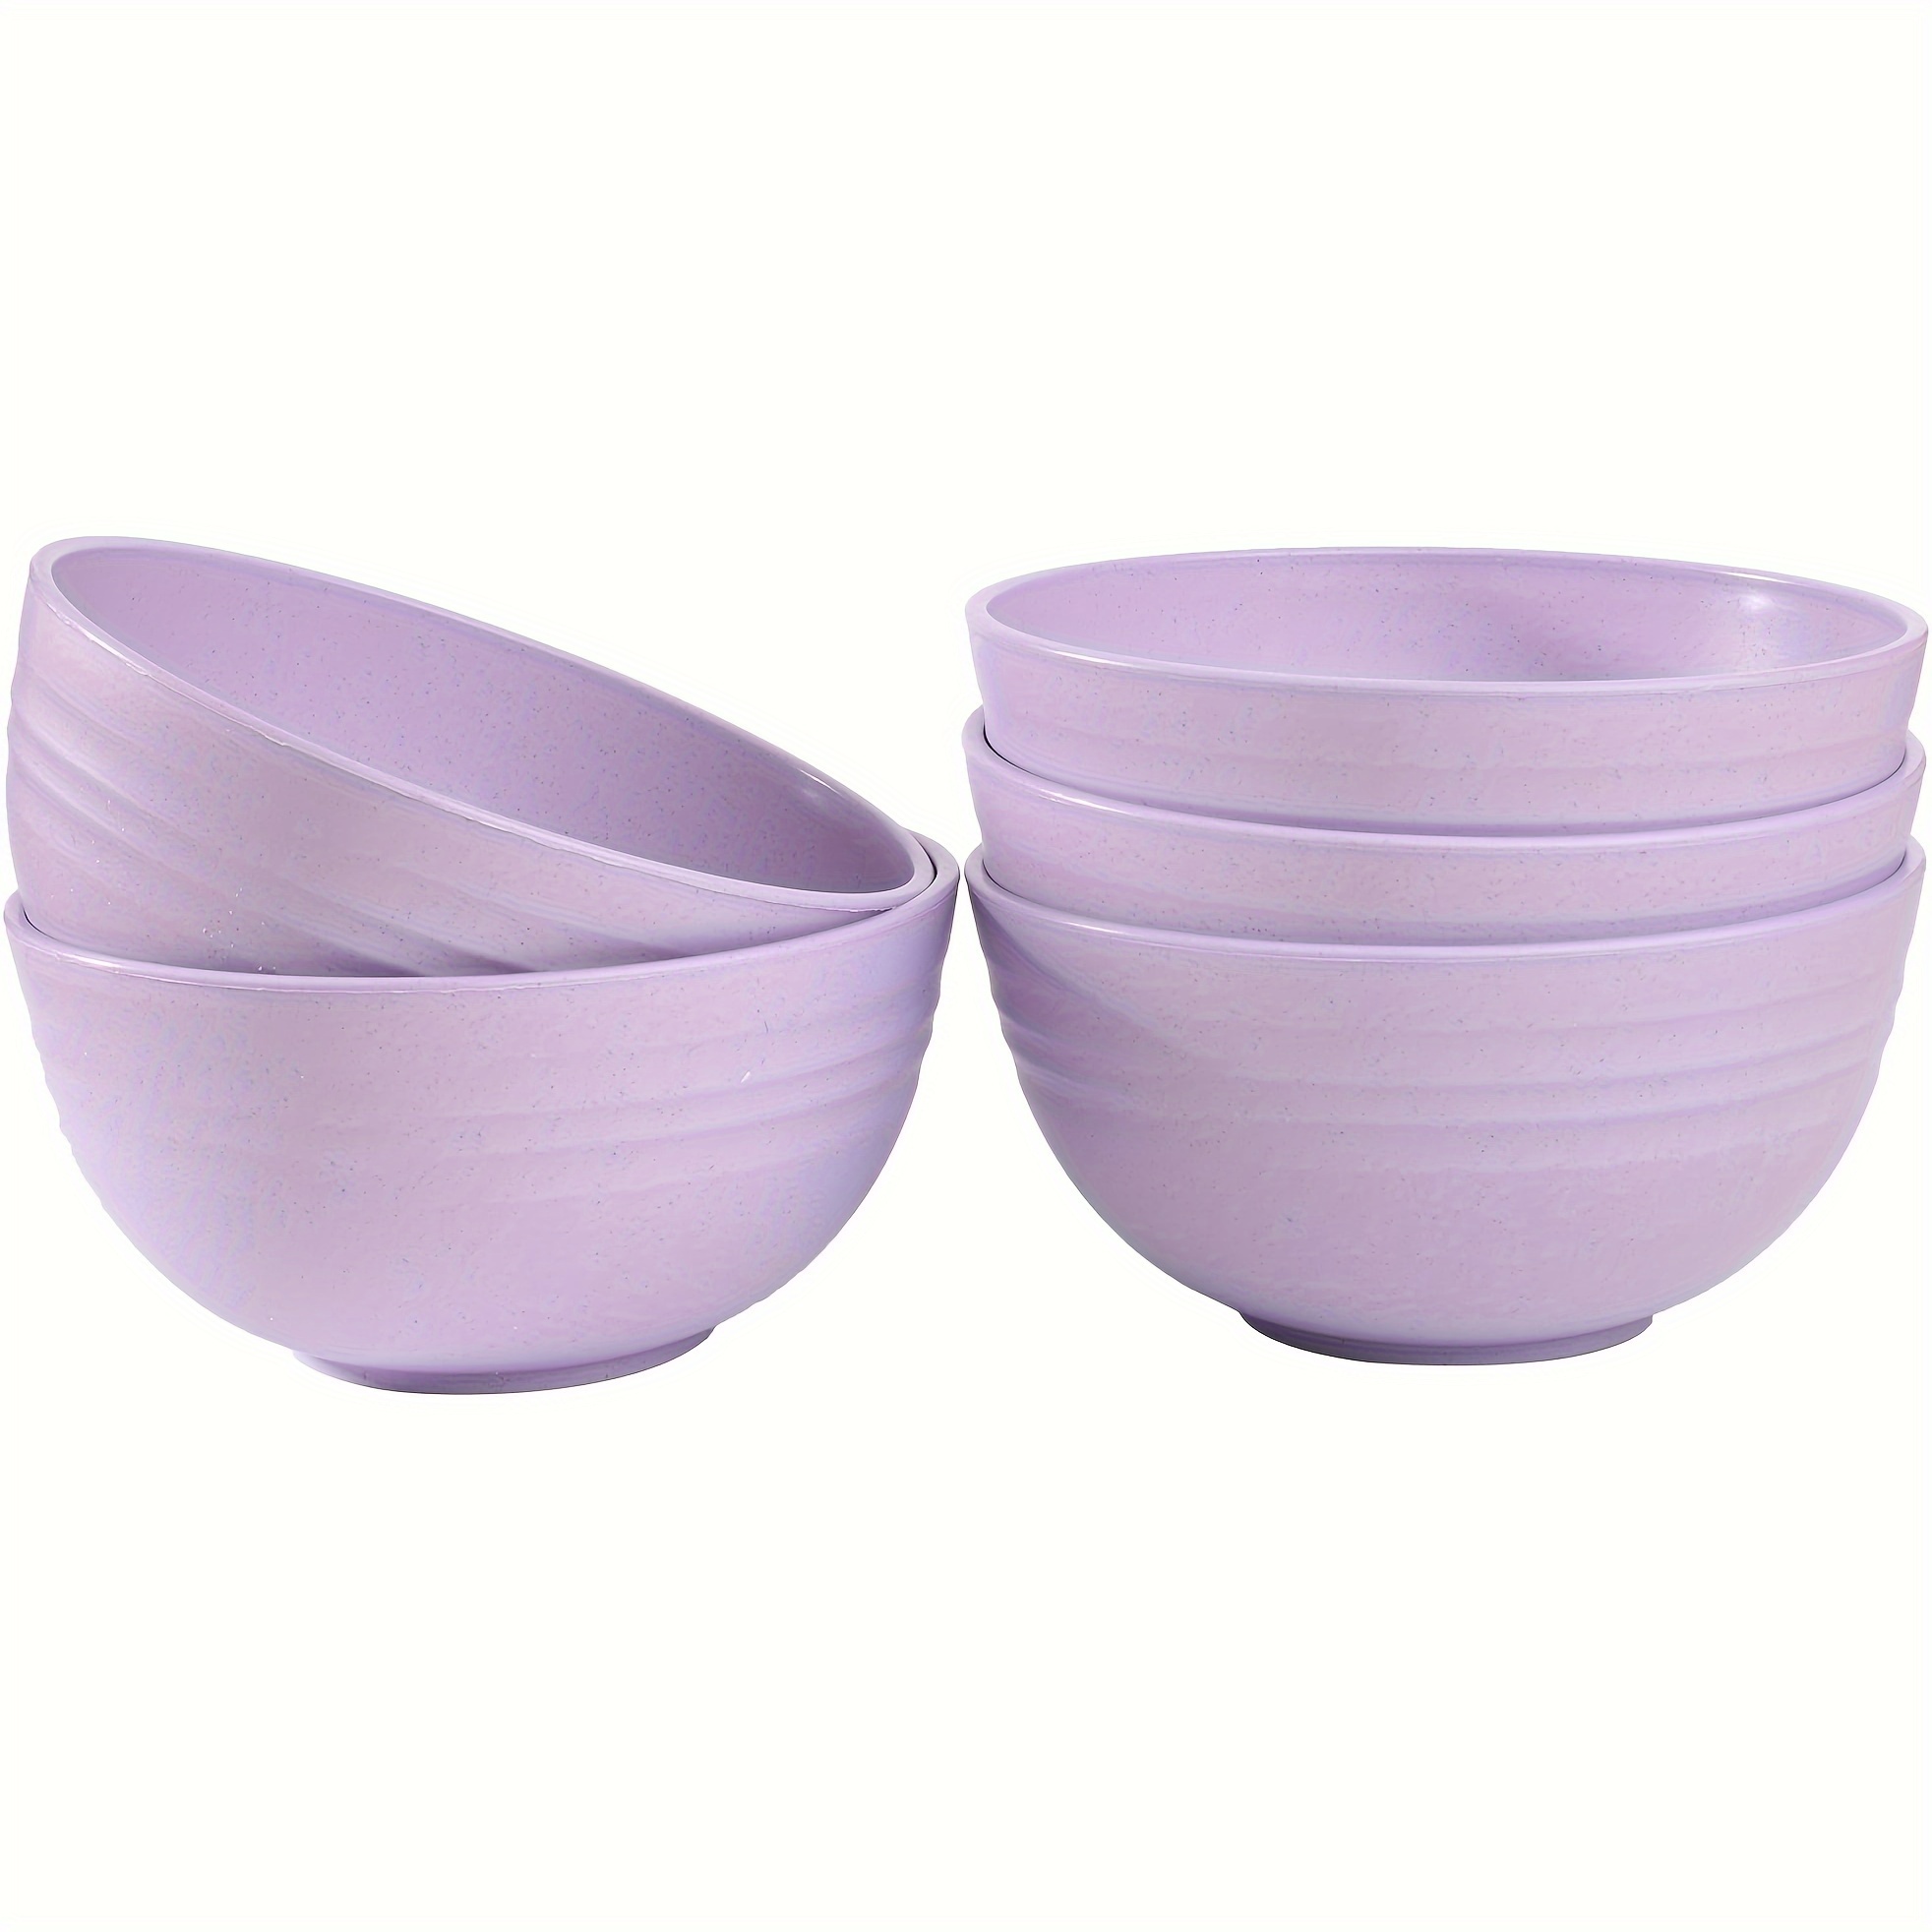 

5pcs Dinnerware Sets, Unbreakable Cereal Bowls, 5.3*2.4inch, Lightweight Bowl For Everyone, Food-safe Bowls, Dishwasher Microwave For Rice, Noodle, Snack, Salad And Soup, Purple, Dining & Entertaining